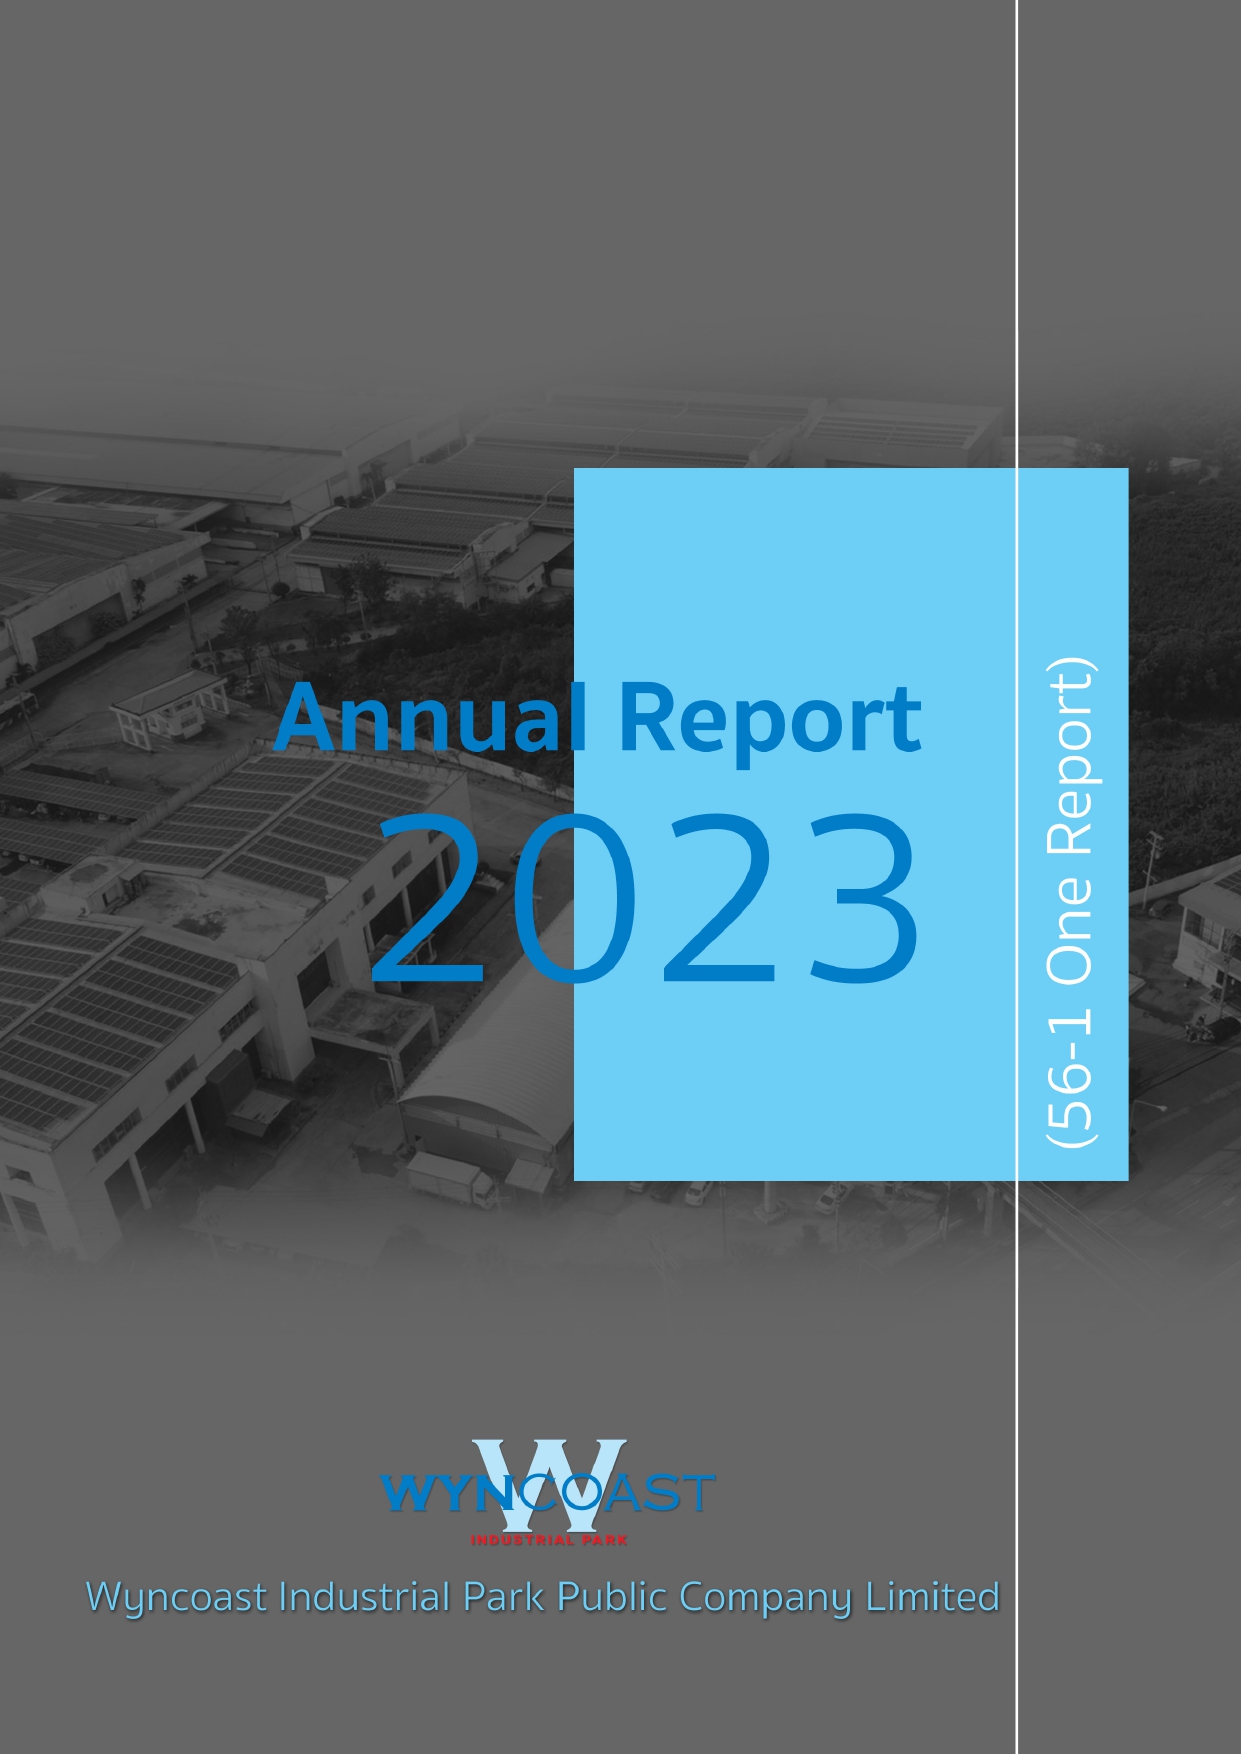 You are currently viewing 56-1 One Report Year 2023